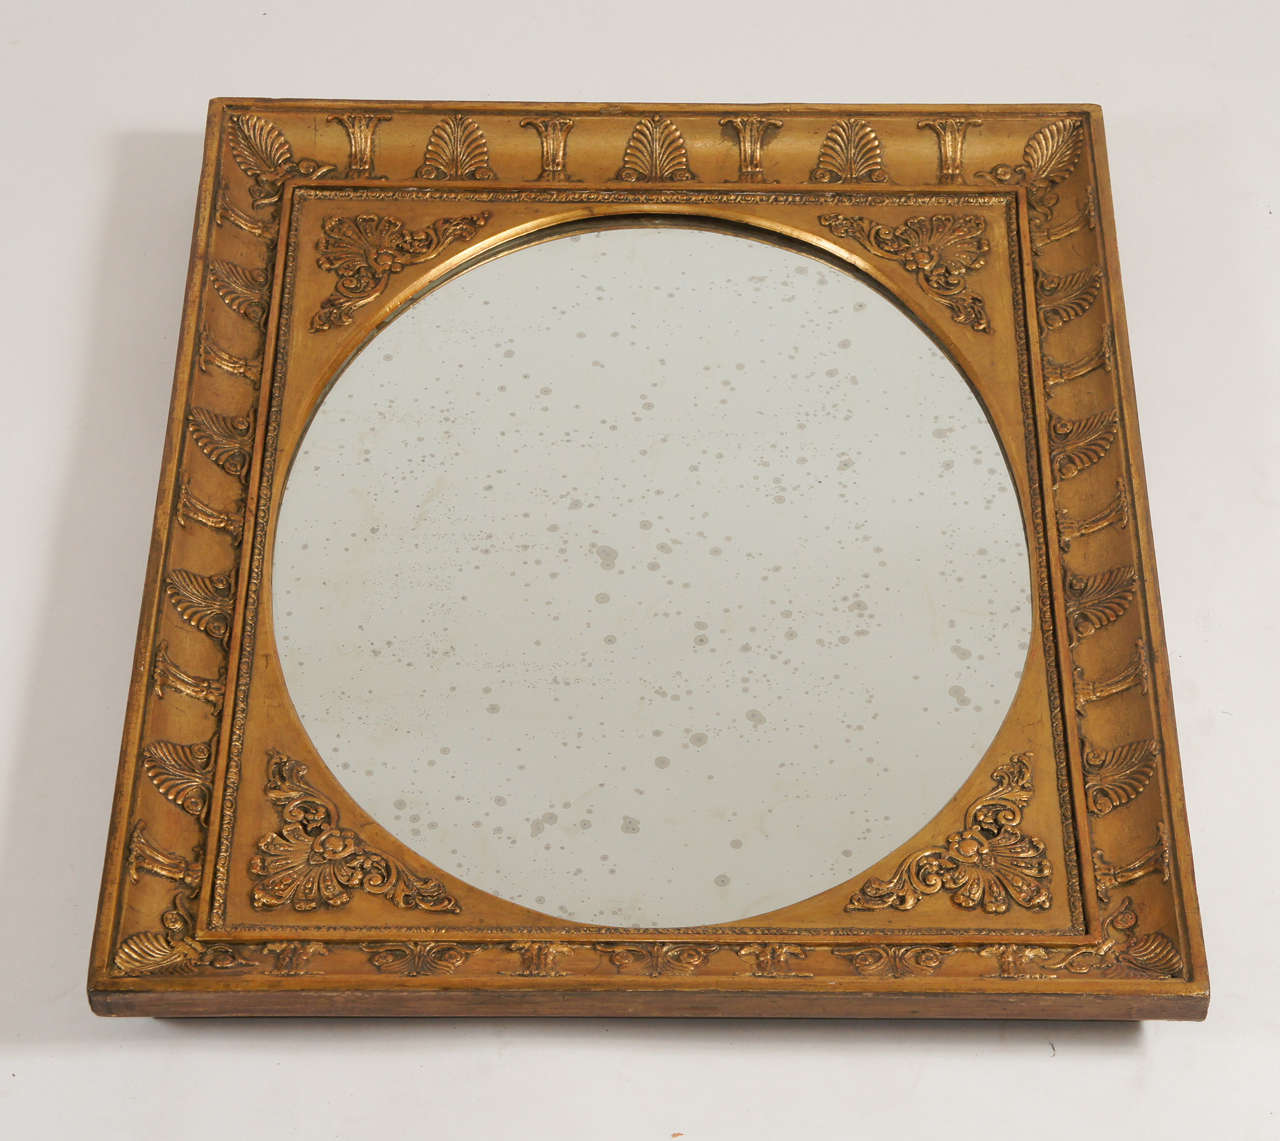 Beautiful French Charles X period giltwood mirror or looking glass of rectangular form having central oval mirror glass reserve with fillet having corner foliate motifs and frame with alternating palmette and gathered stalk design.